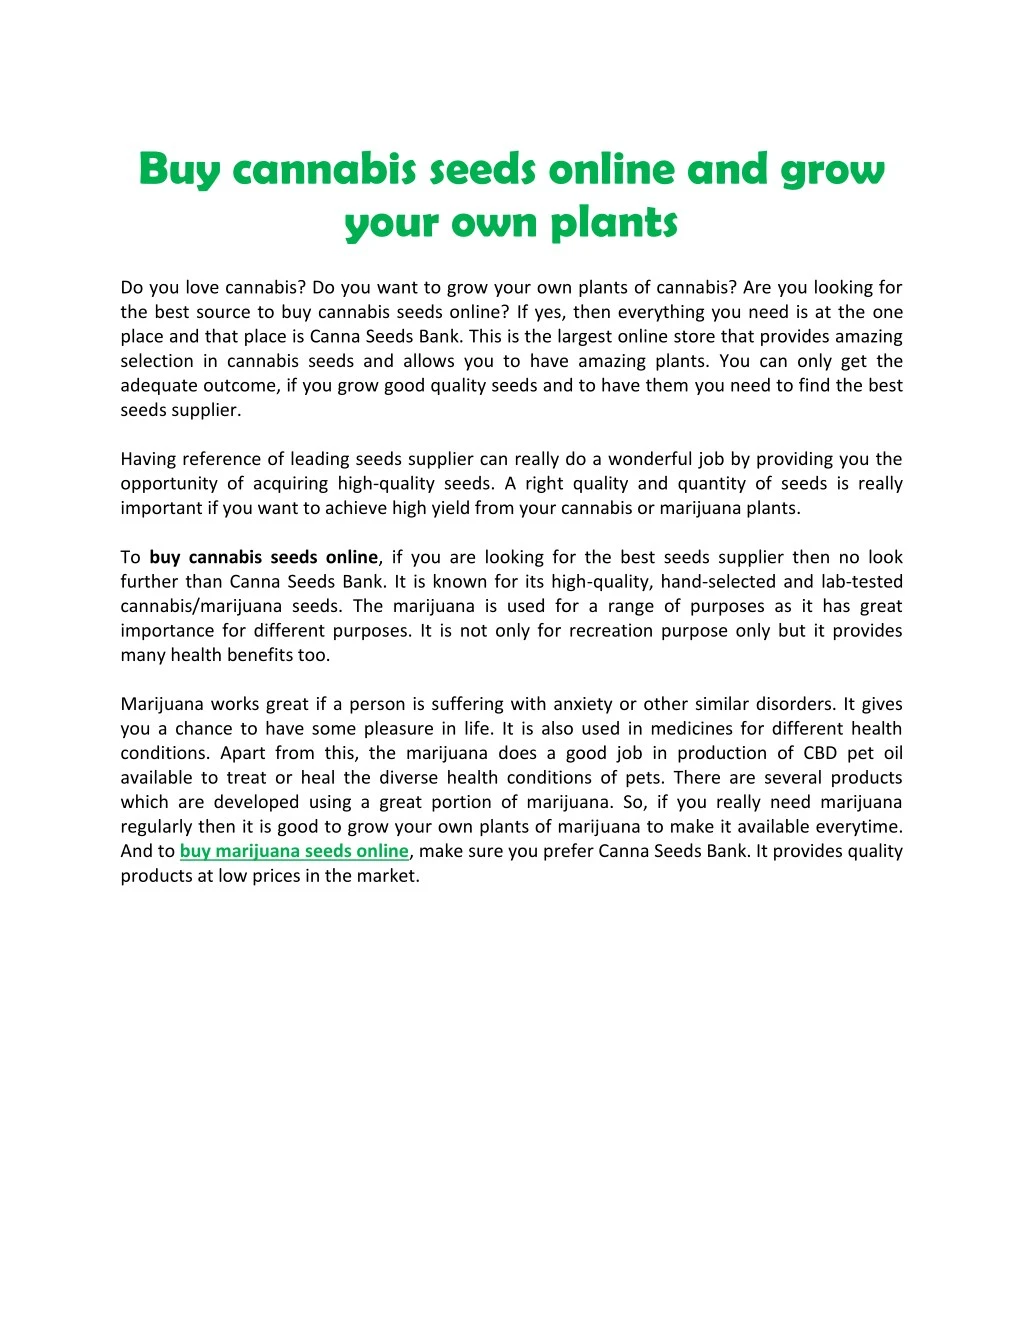 buy cannabis seeds online and grow your own plants